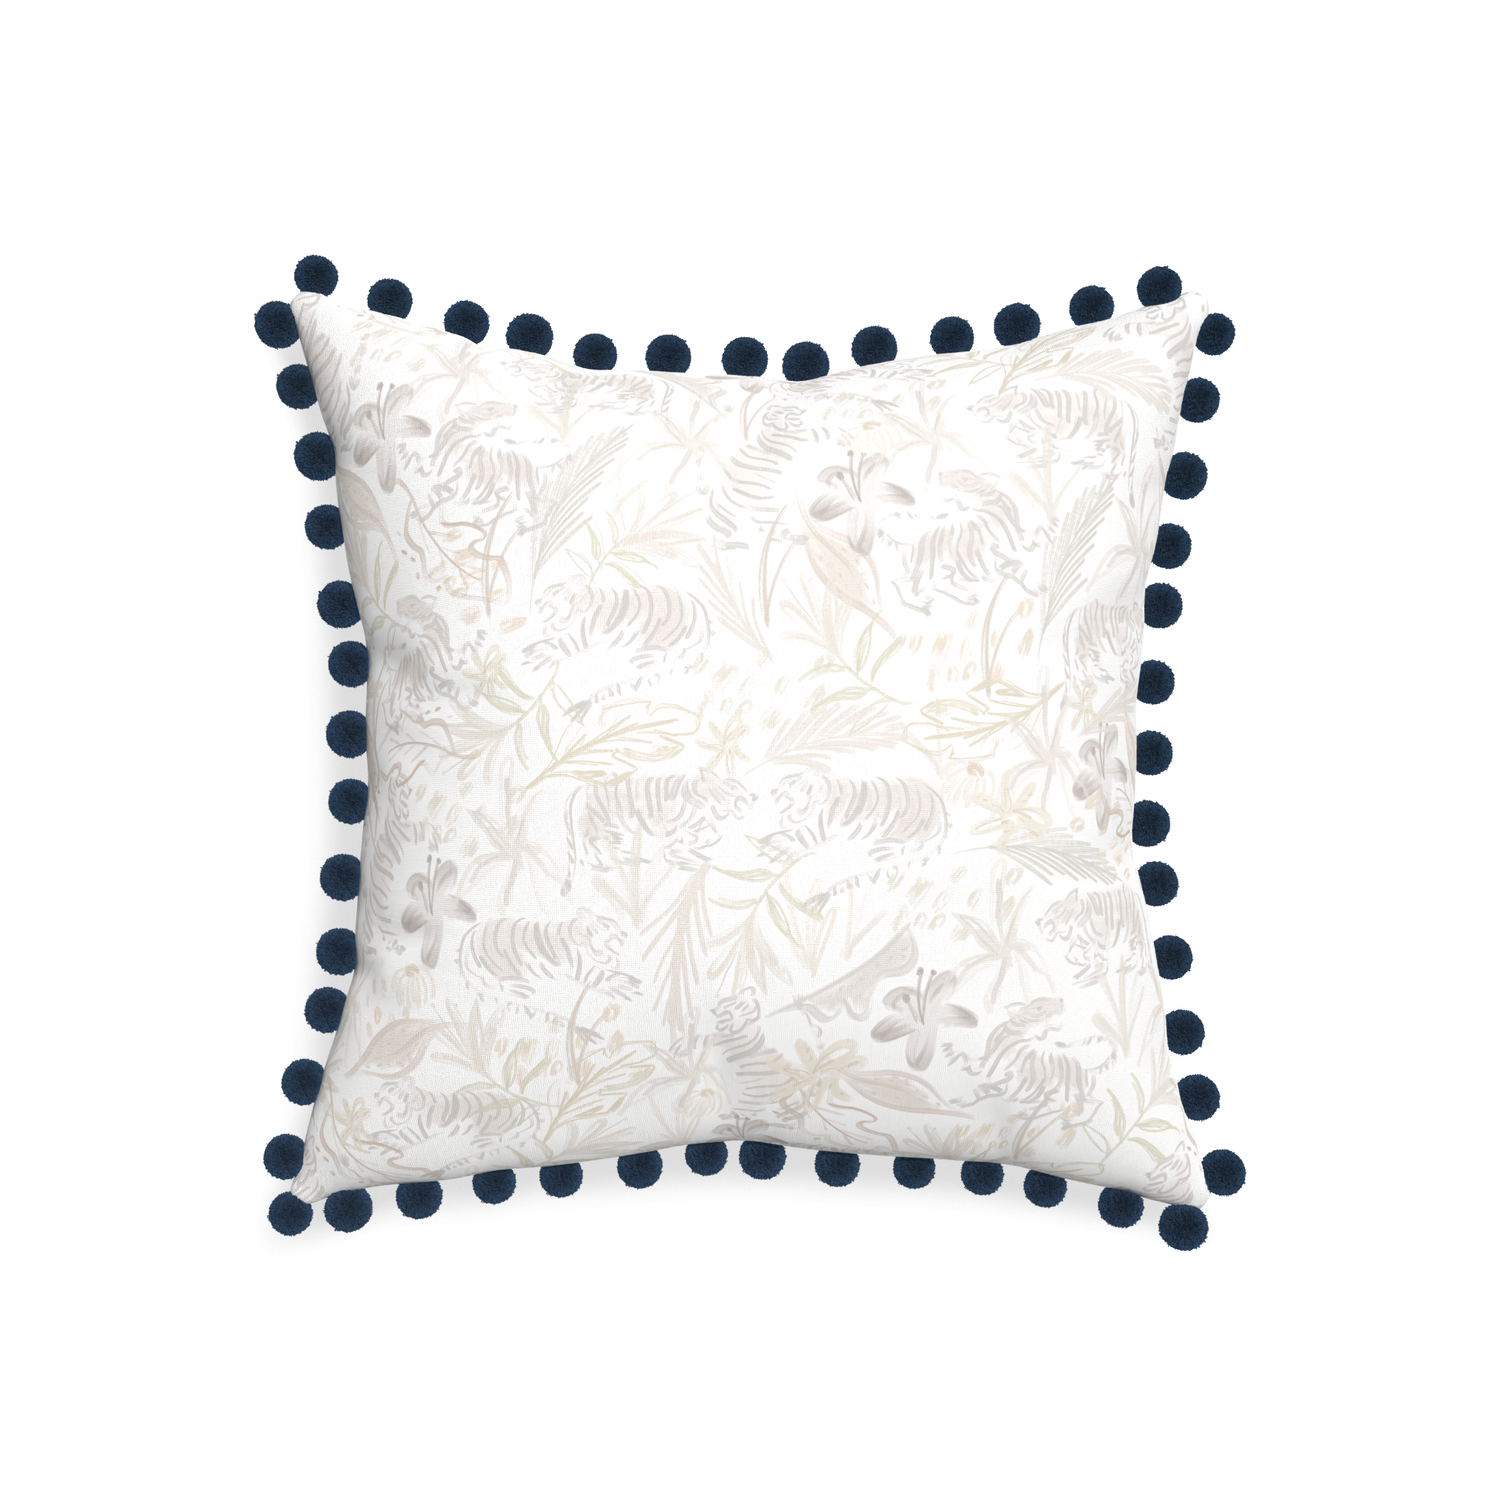 20-square frida sand custom beige chinoiserie tigerpillow with c on white background